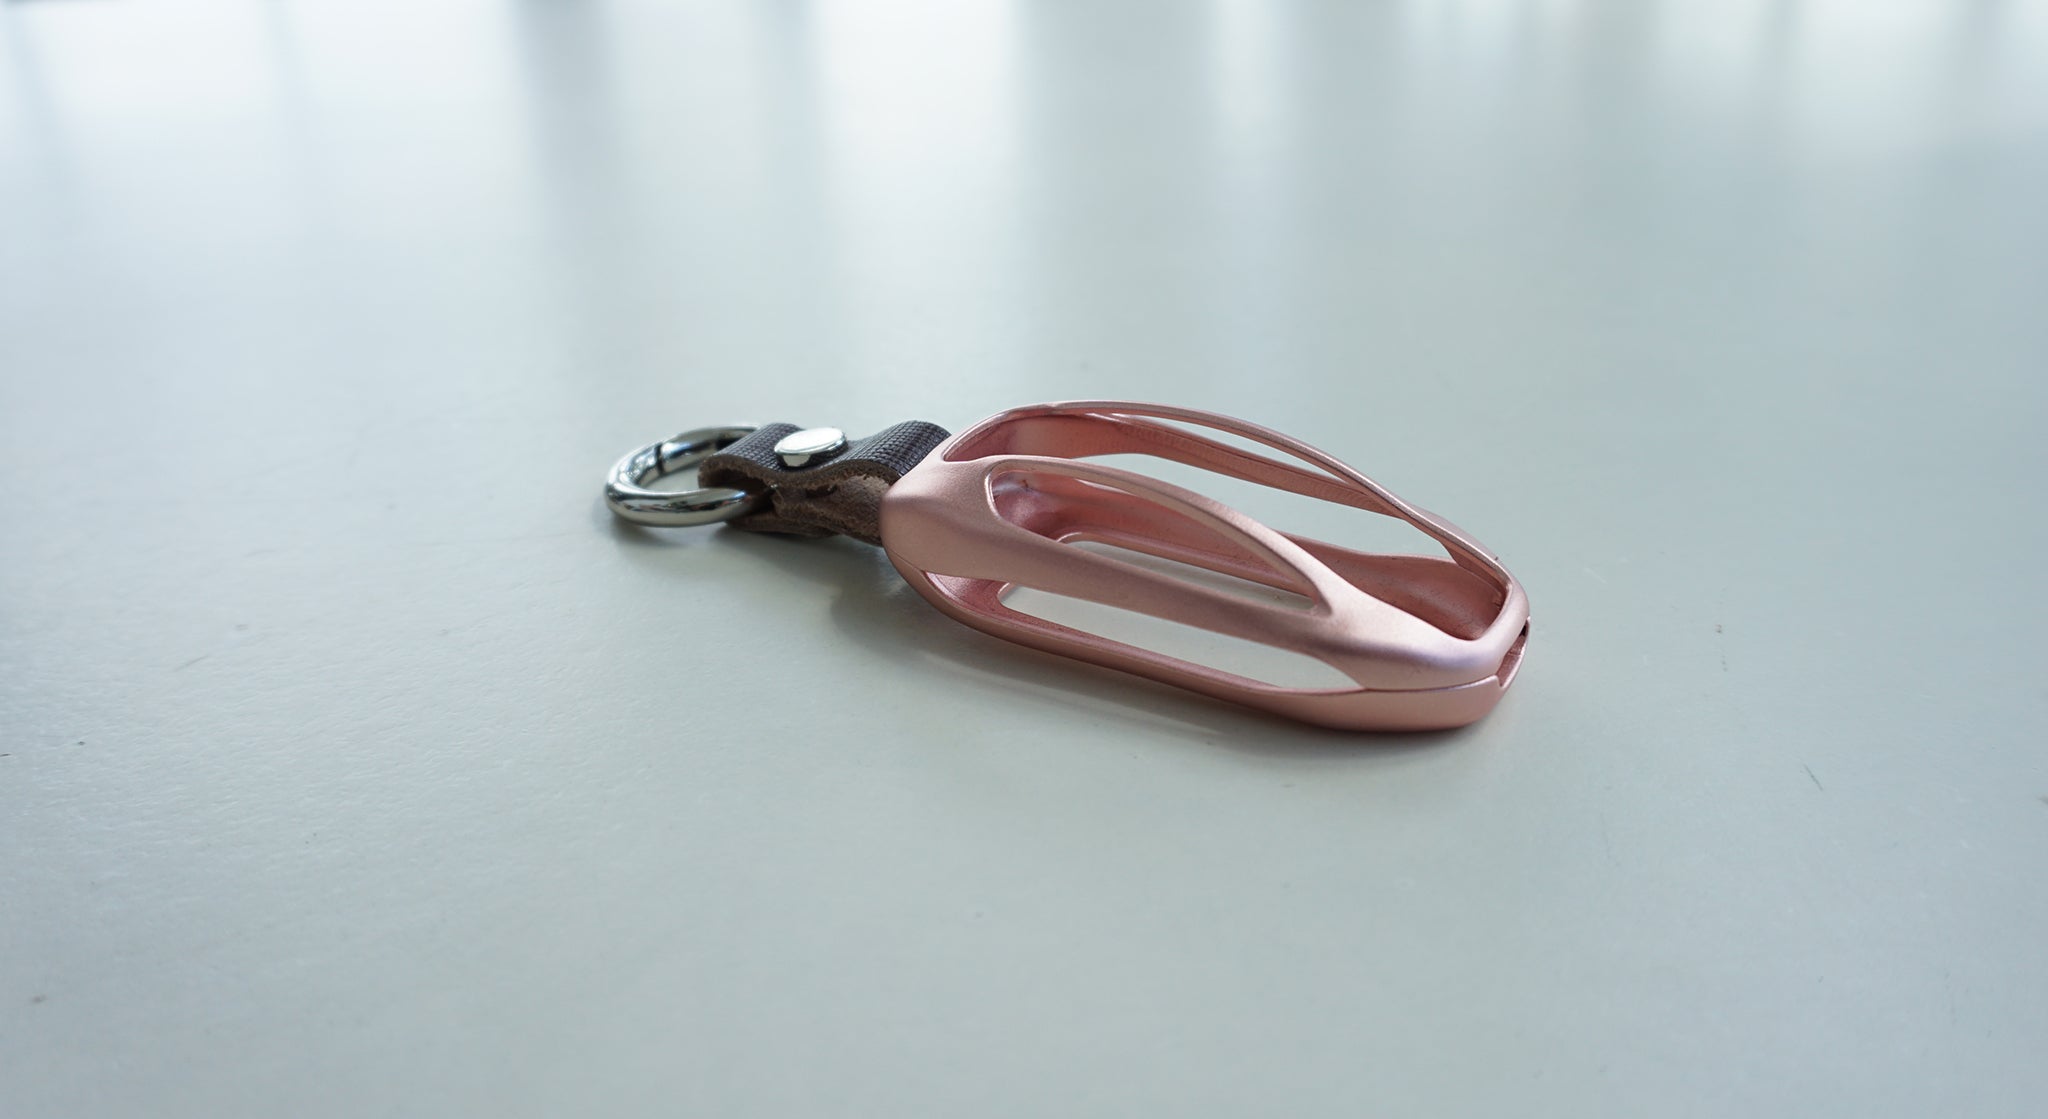 TAPTES Silicone Key Fob Cover with Aluminum Key Chain for Model X